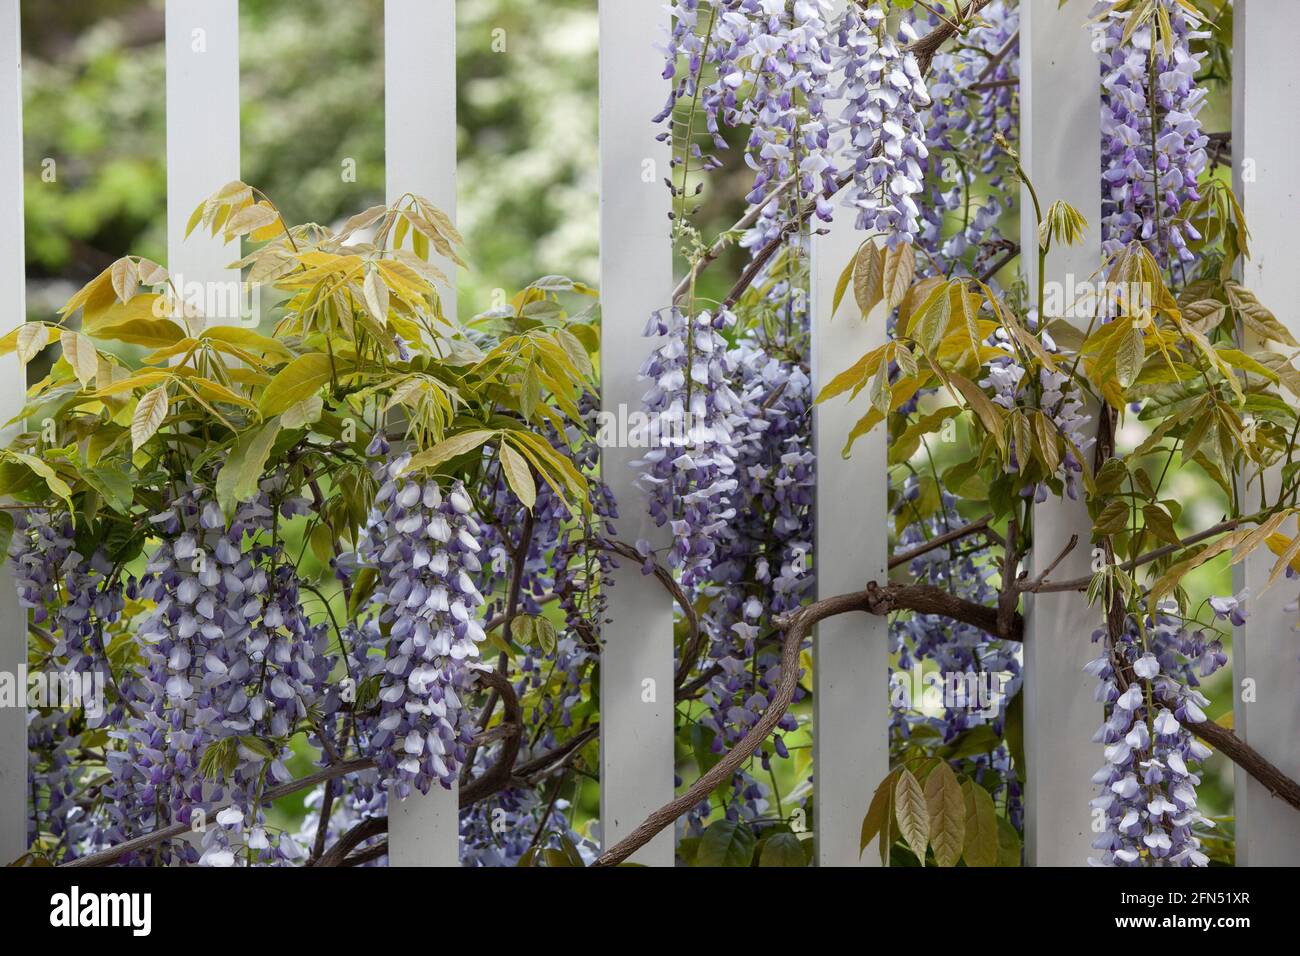 London, UK: In a garden in Clapham in the month of May, a wisteria sinensis 'Prolific' blooms on a white wooden balcony, its long dangling racemes of Stock Photo